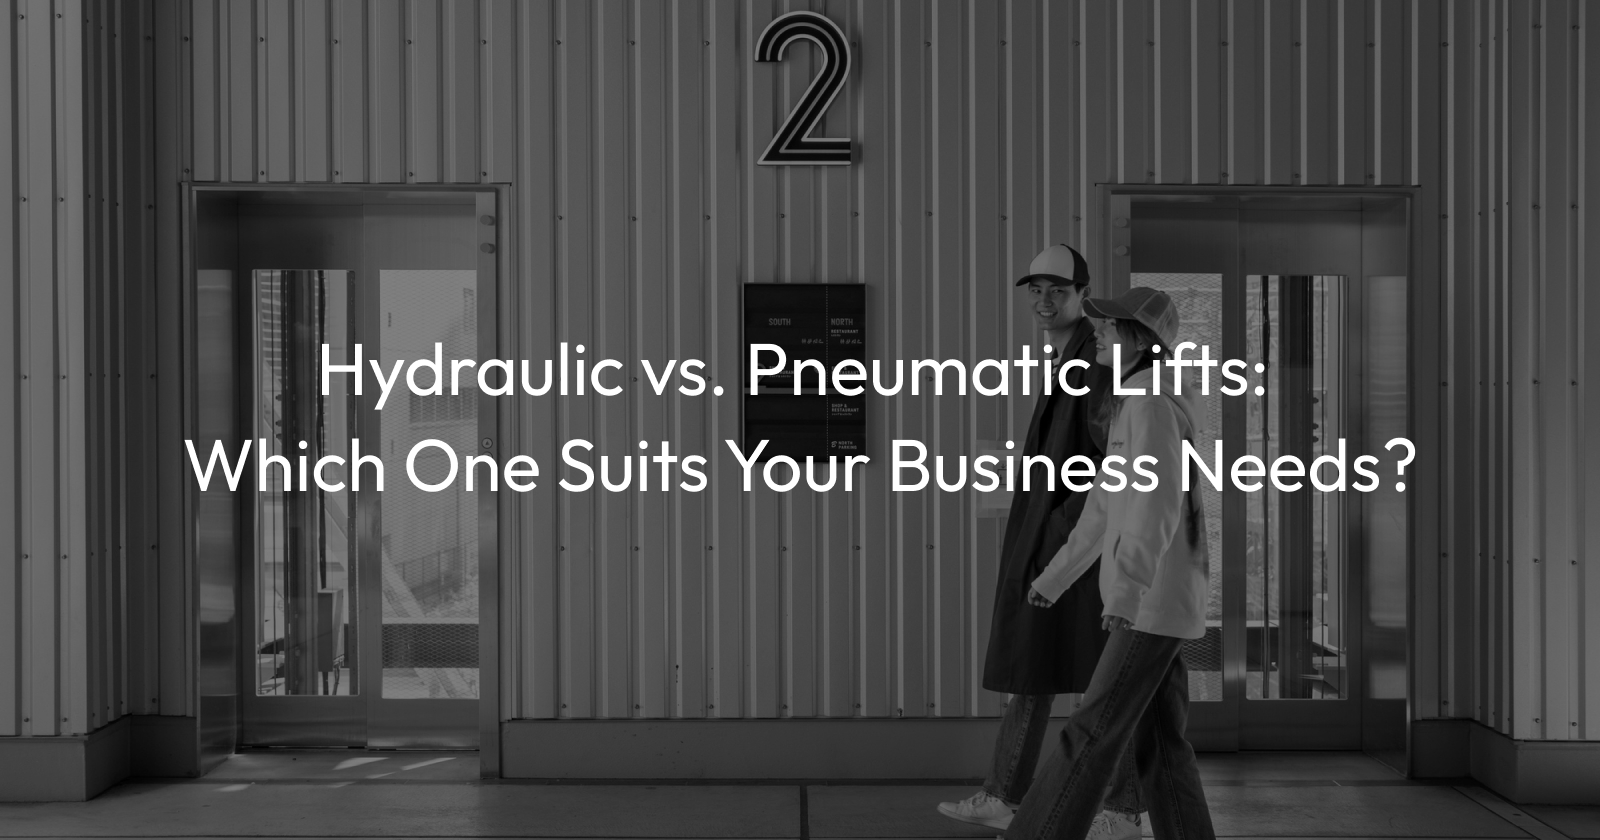 Hydraulic vs. Pneumatic Lifts - Which One Suits Your Business Needs